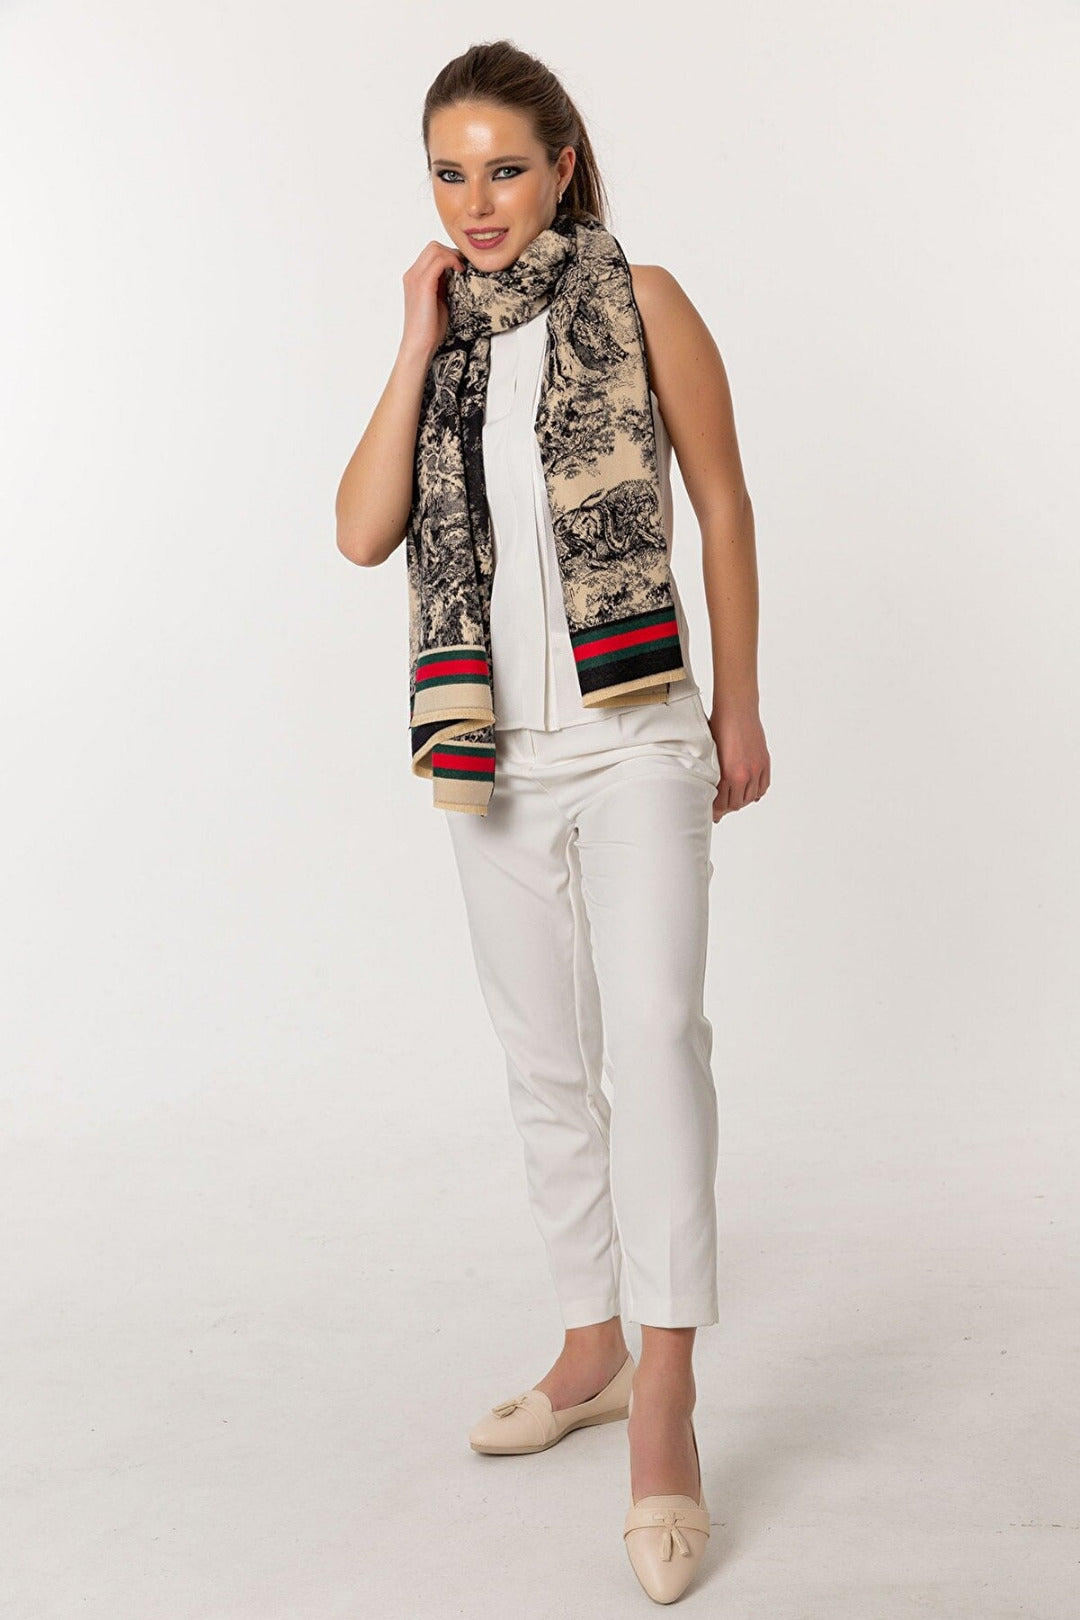 Tree Borders Reversible Mo-shmere Scarves - Navy